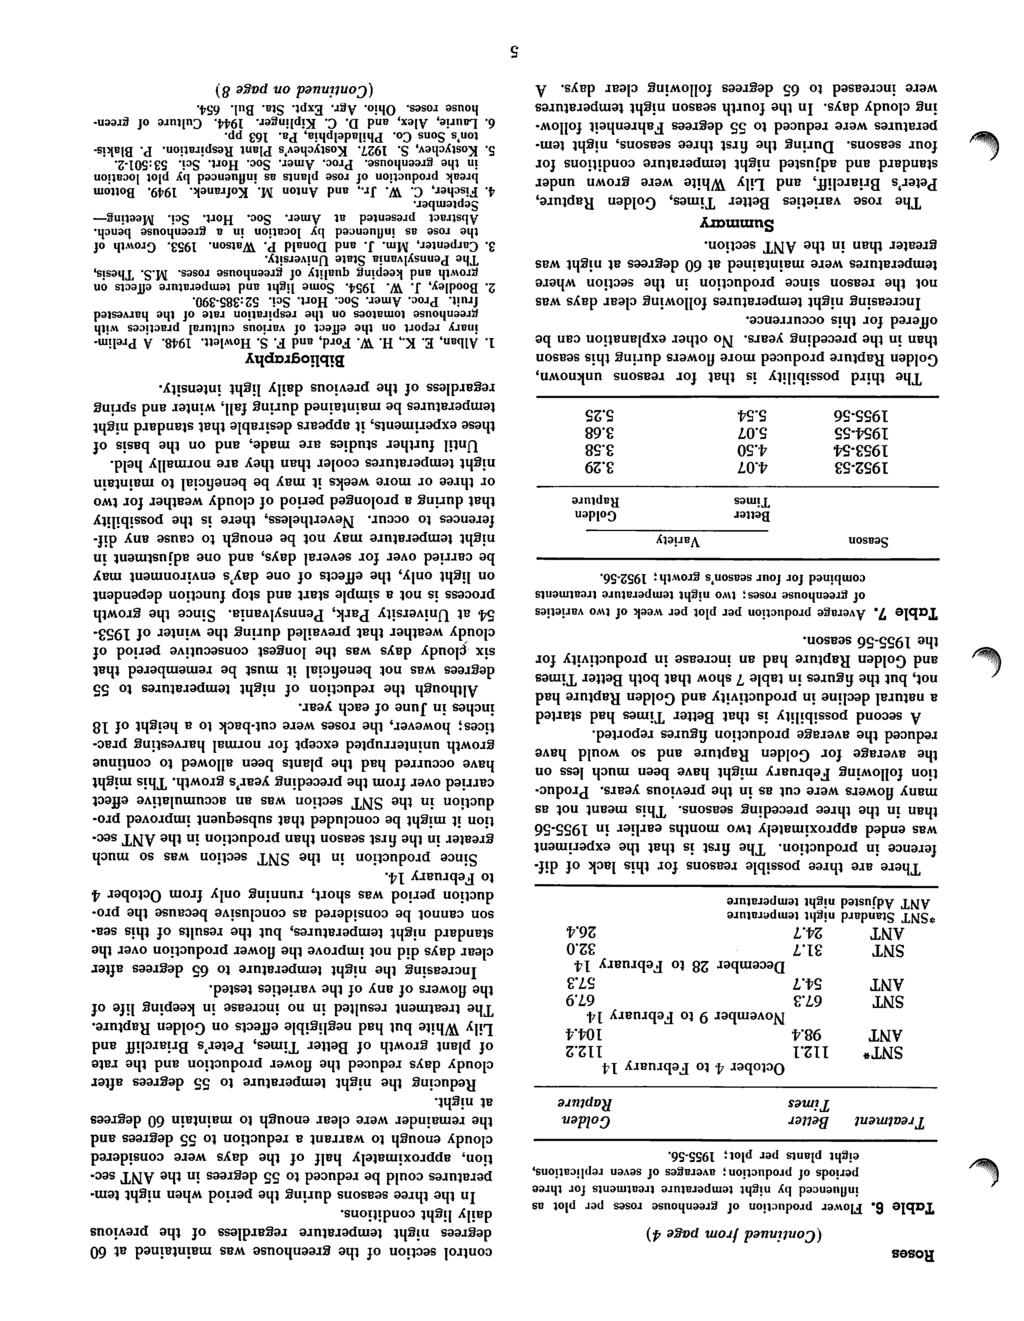 ( fc/ Roses (Continued from page 4) Table 6. Flower production of greenhouse roses per plot as eight plants per plot; 1955-56. Treatment October 4 to February 14 * 112.1 112.2 98.4 104.